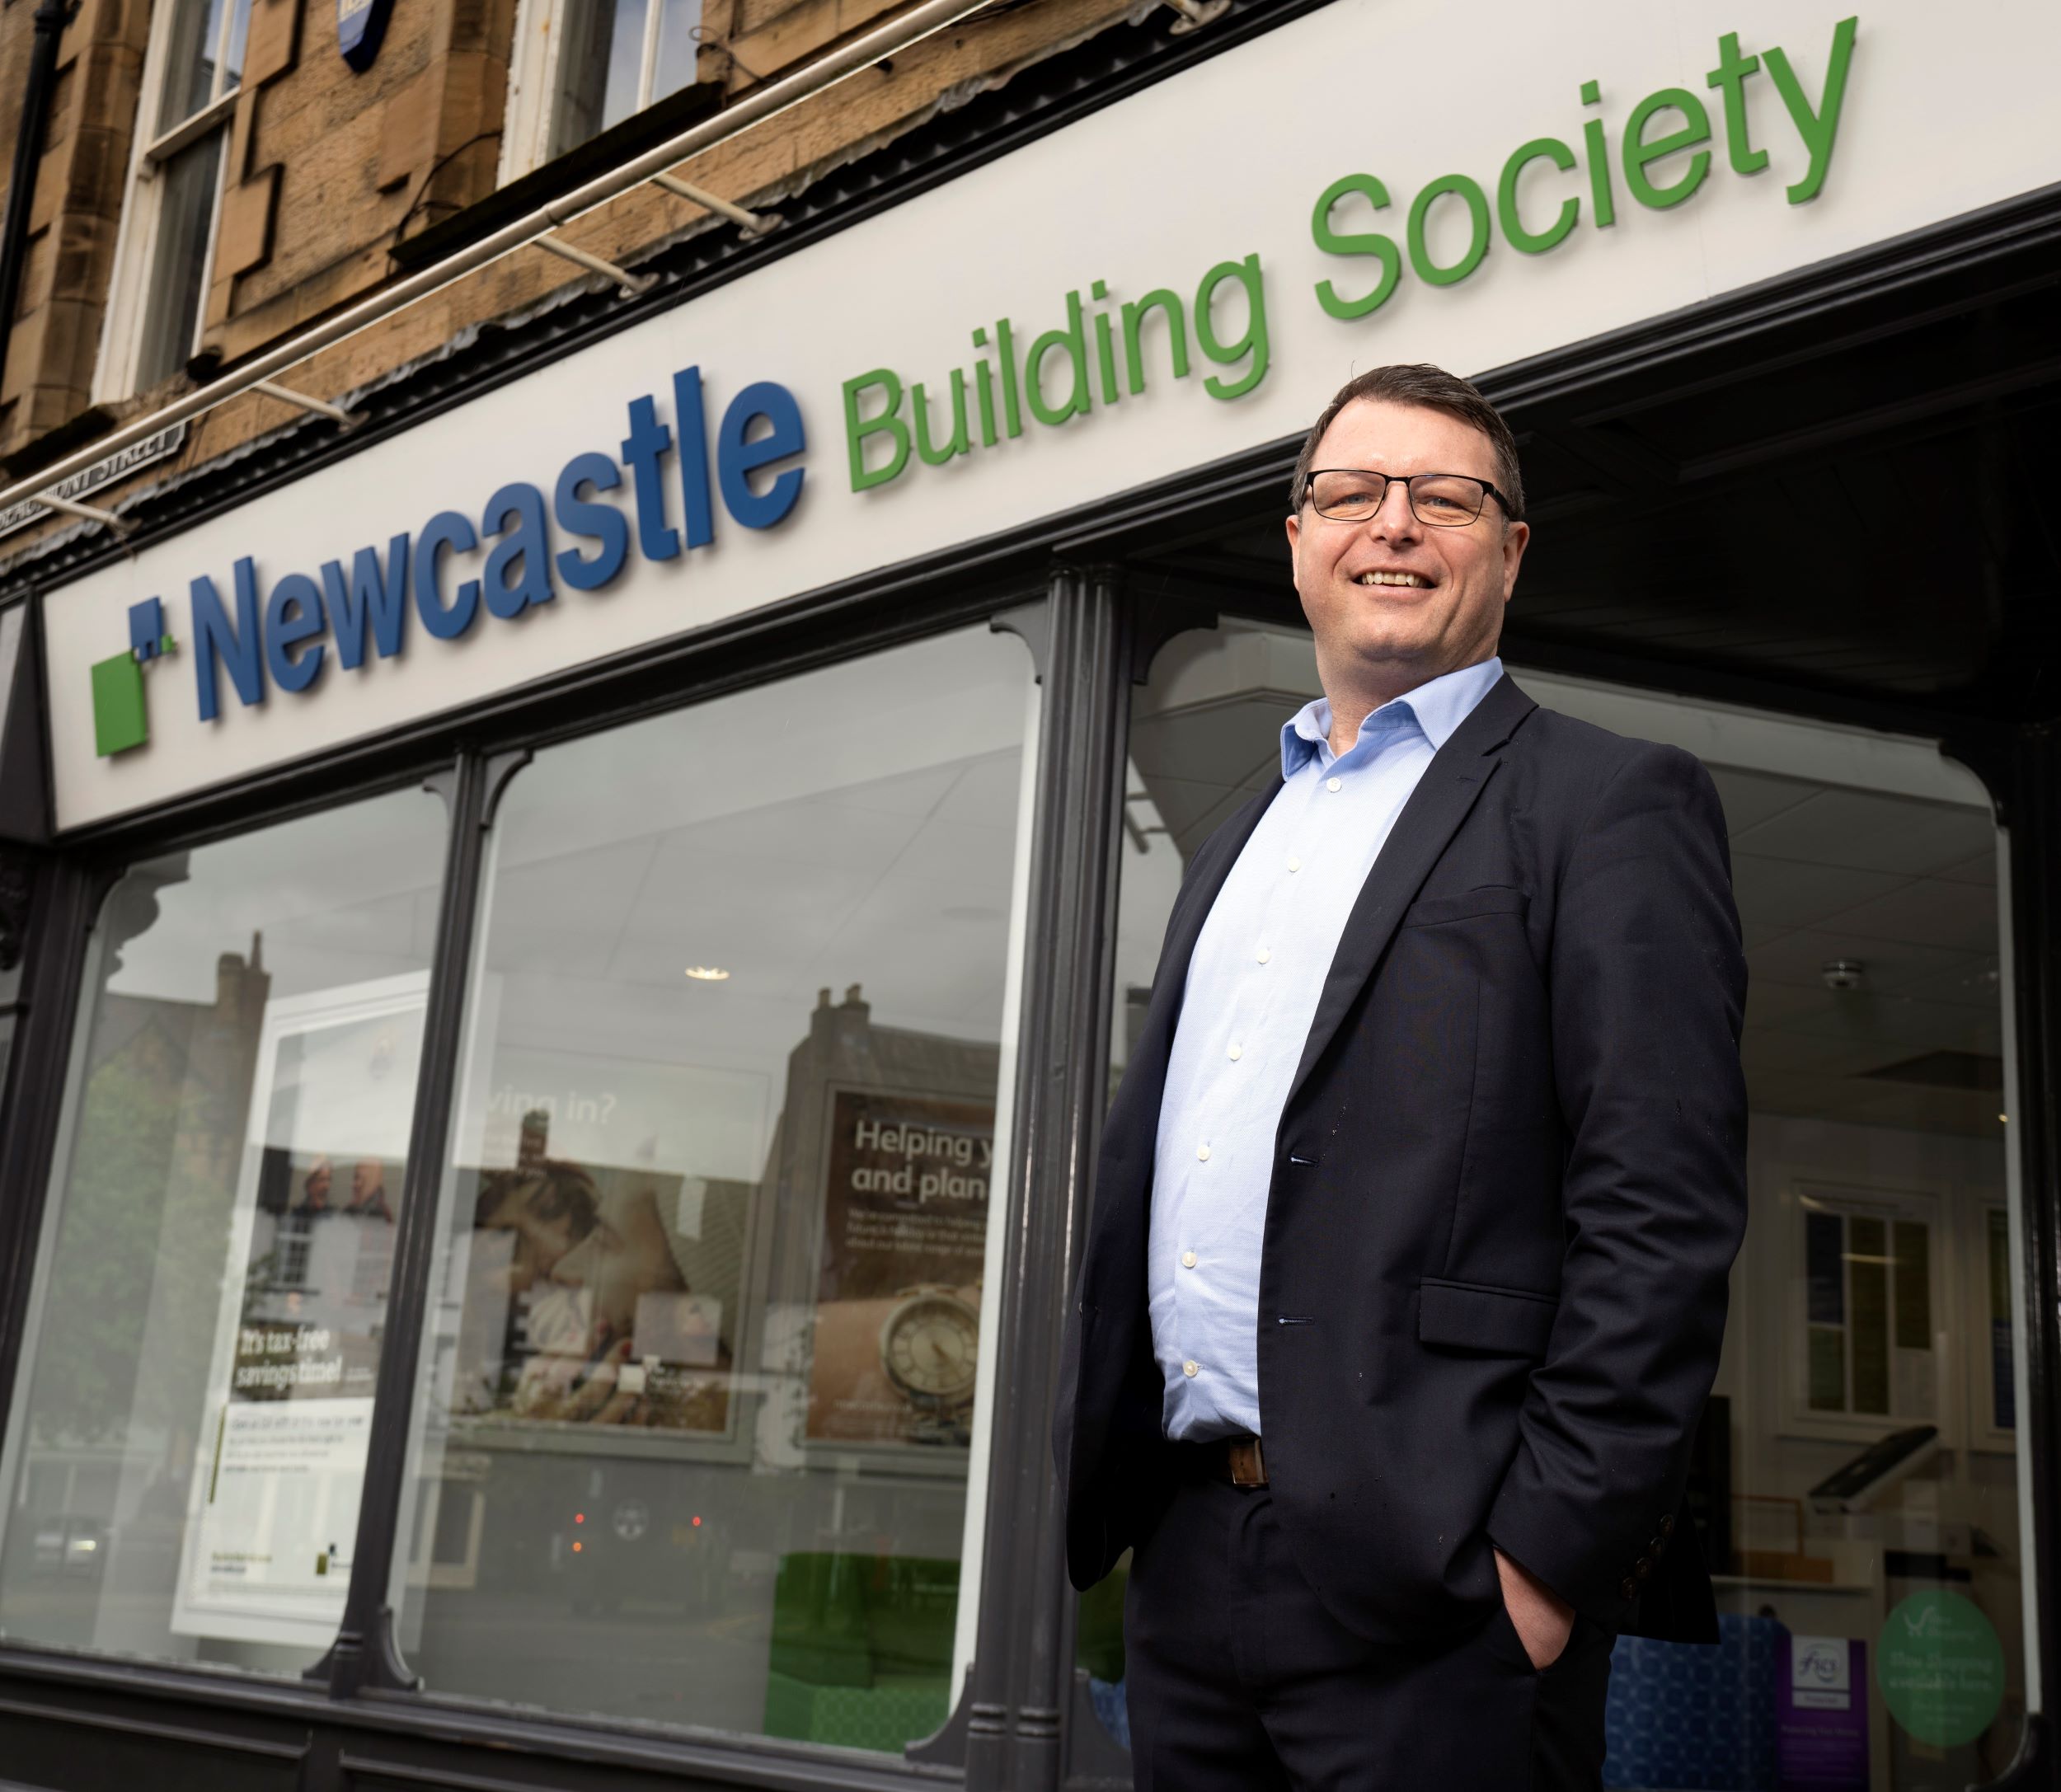 Michael Conville, chief customer officer at Newcastle Building Society